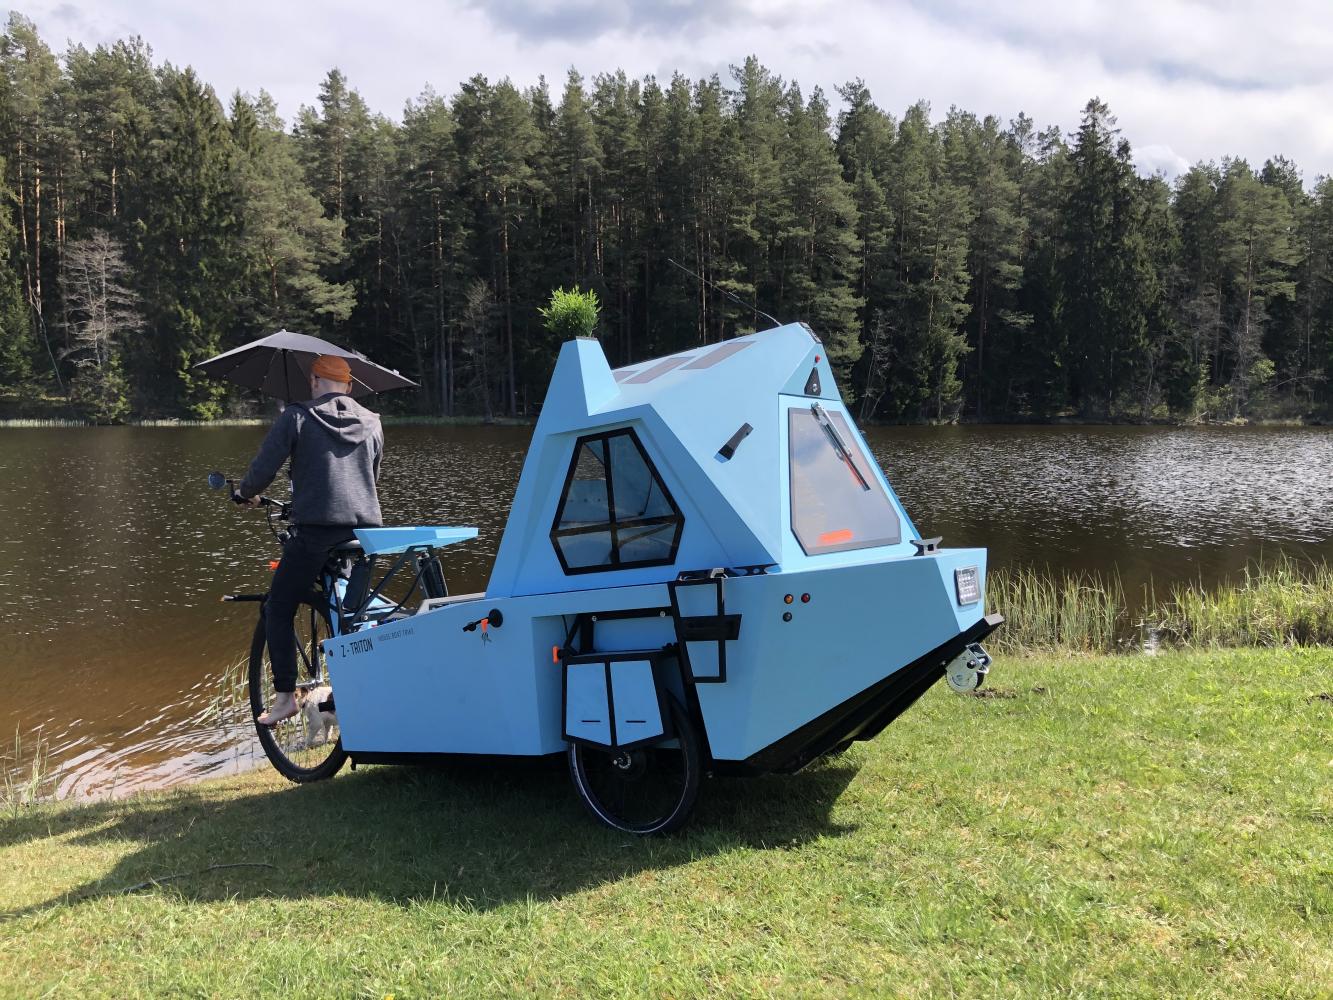 #Vanlife / Boatlife / Bikelife? Zeltini Z-Triton Amphibious E-Tricycle Camper is out of this world